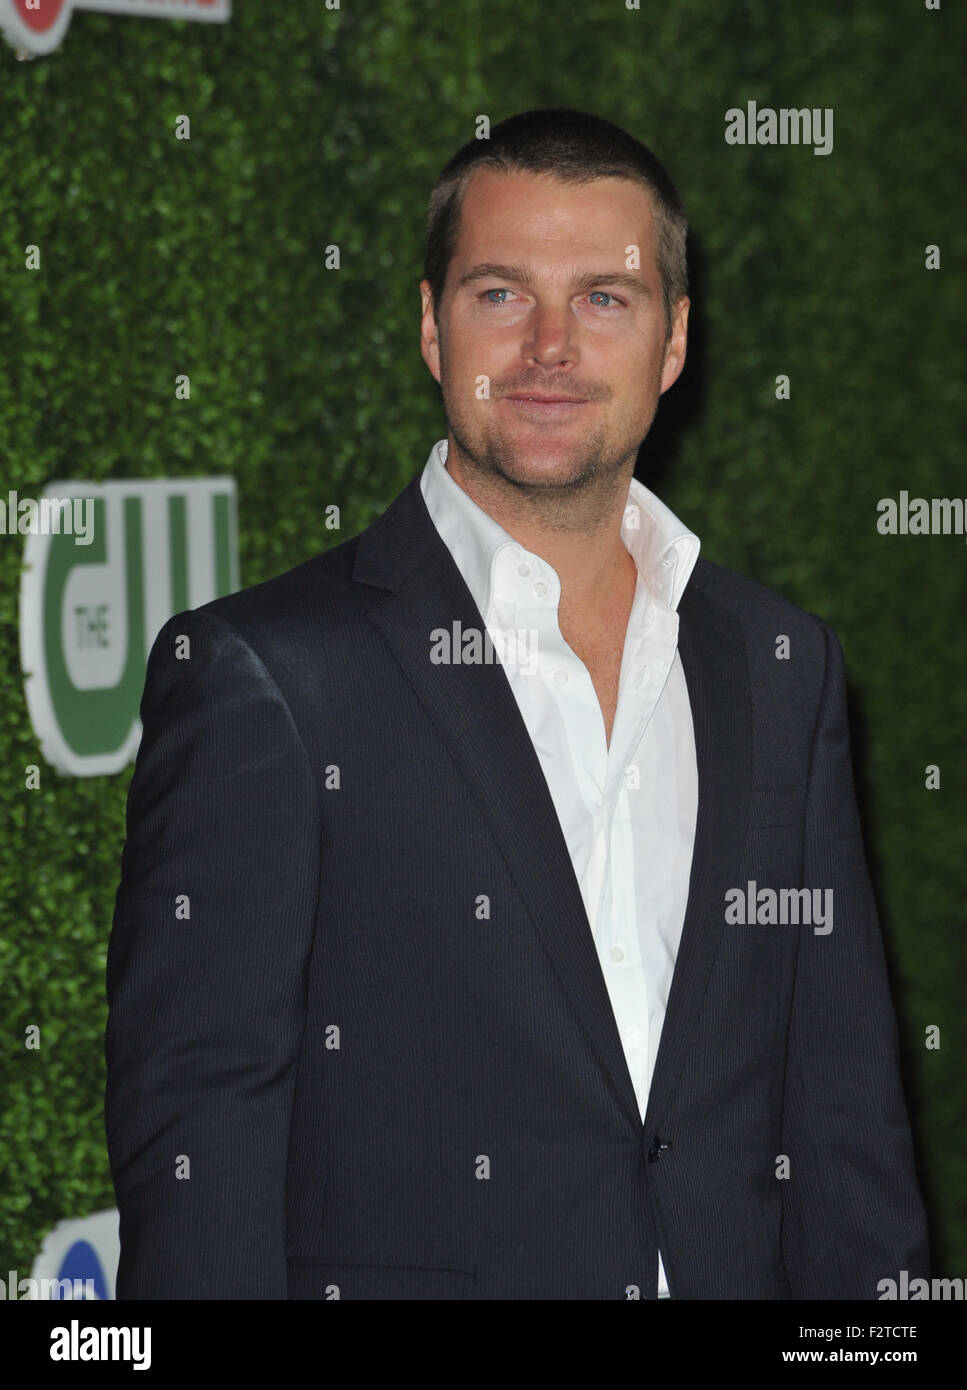 LOS ANGELES, CA - JULY 28, 2010: Chris O'Donnell - star of 'NCIS: Los Angeles' - at CBS TV Summer Press Tour Party in Beverly Hills. Stock Photo